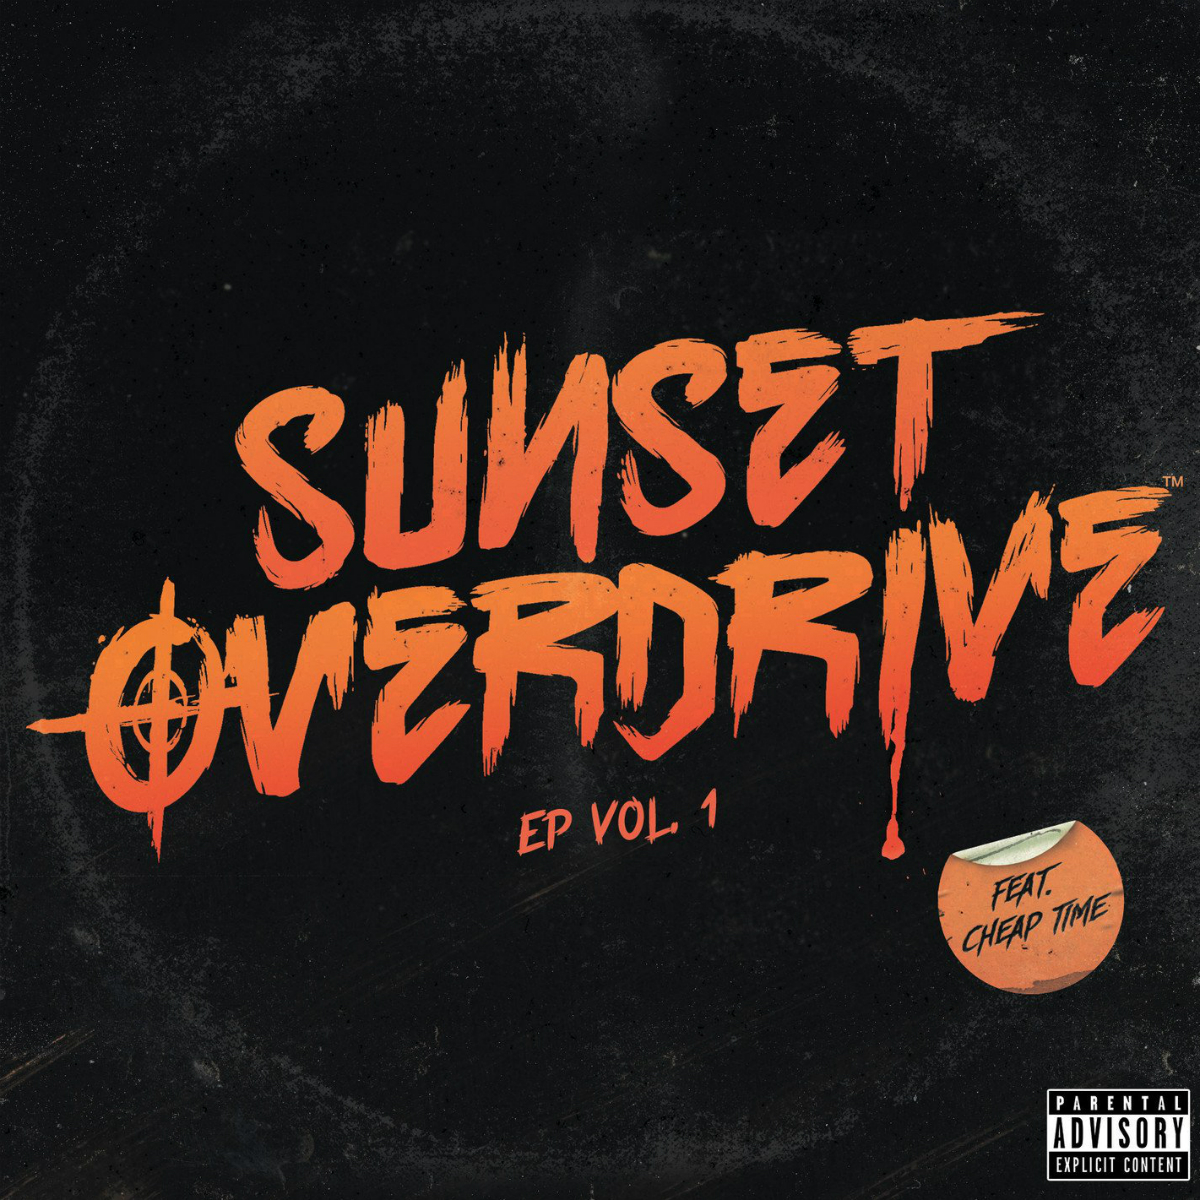 Sunset_Overdrive_EP_1_cover1200x1200.jpg